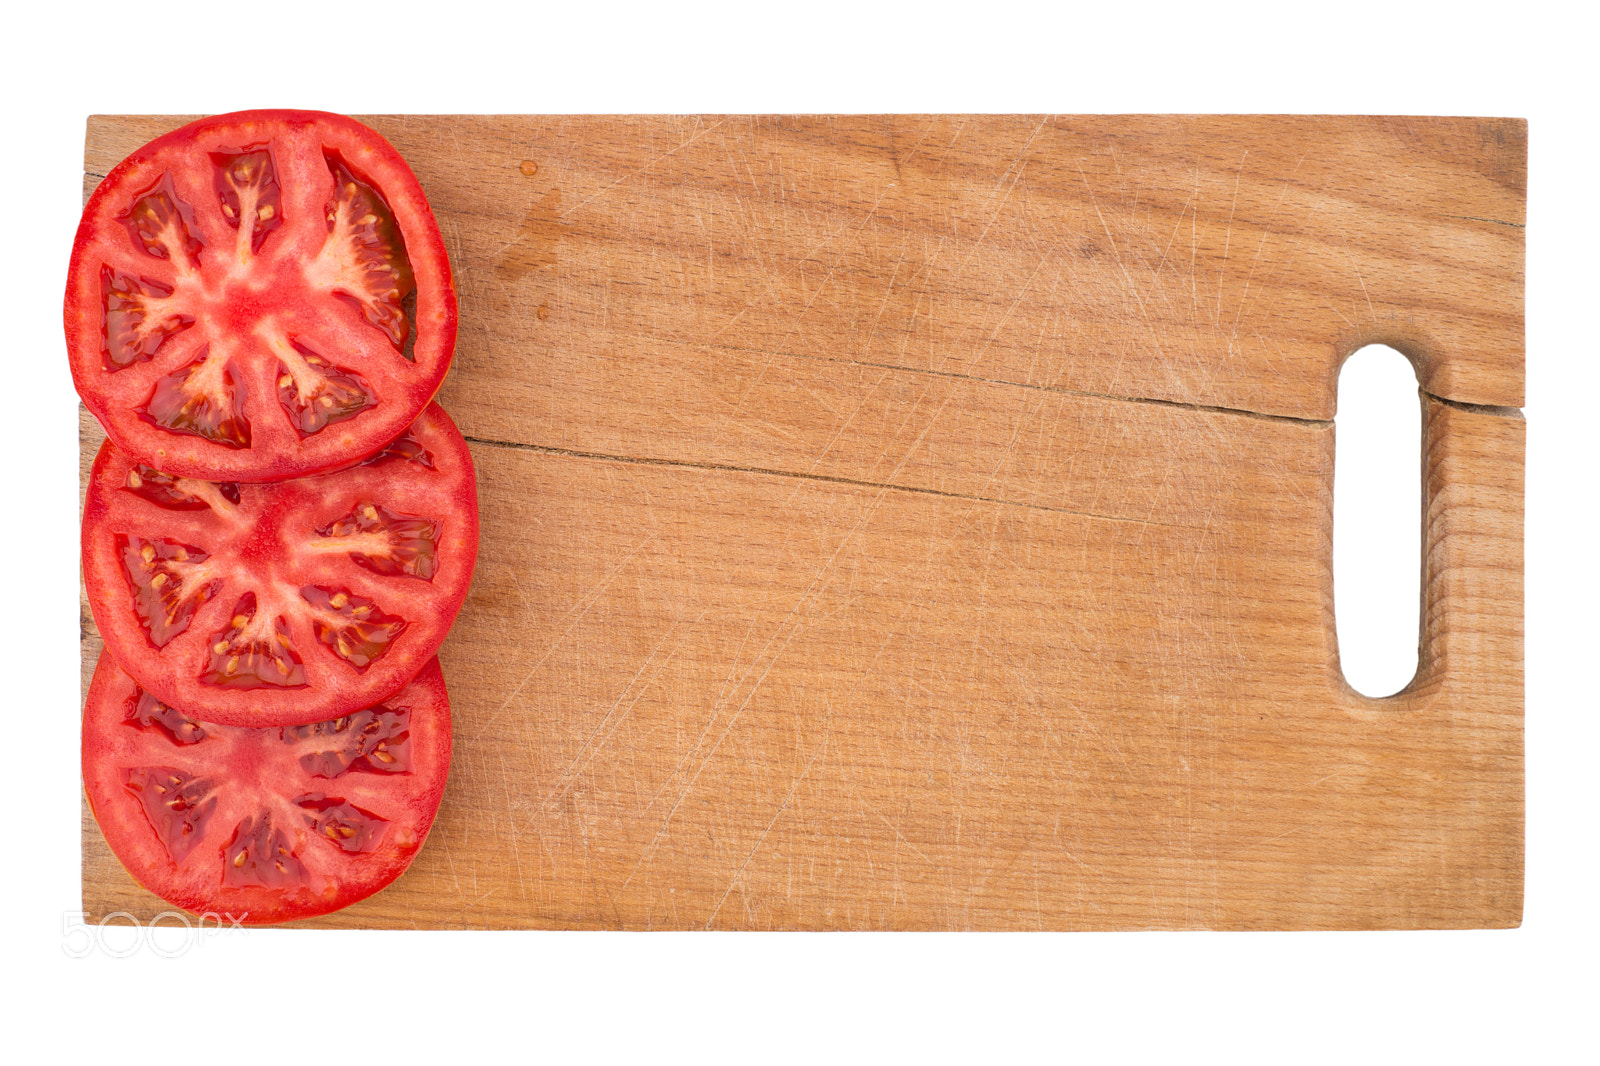 Sony a99 II sample photo. Chopped tomatoes on cutting board. photography